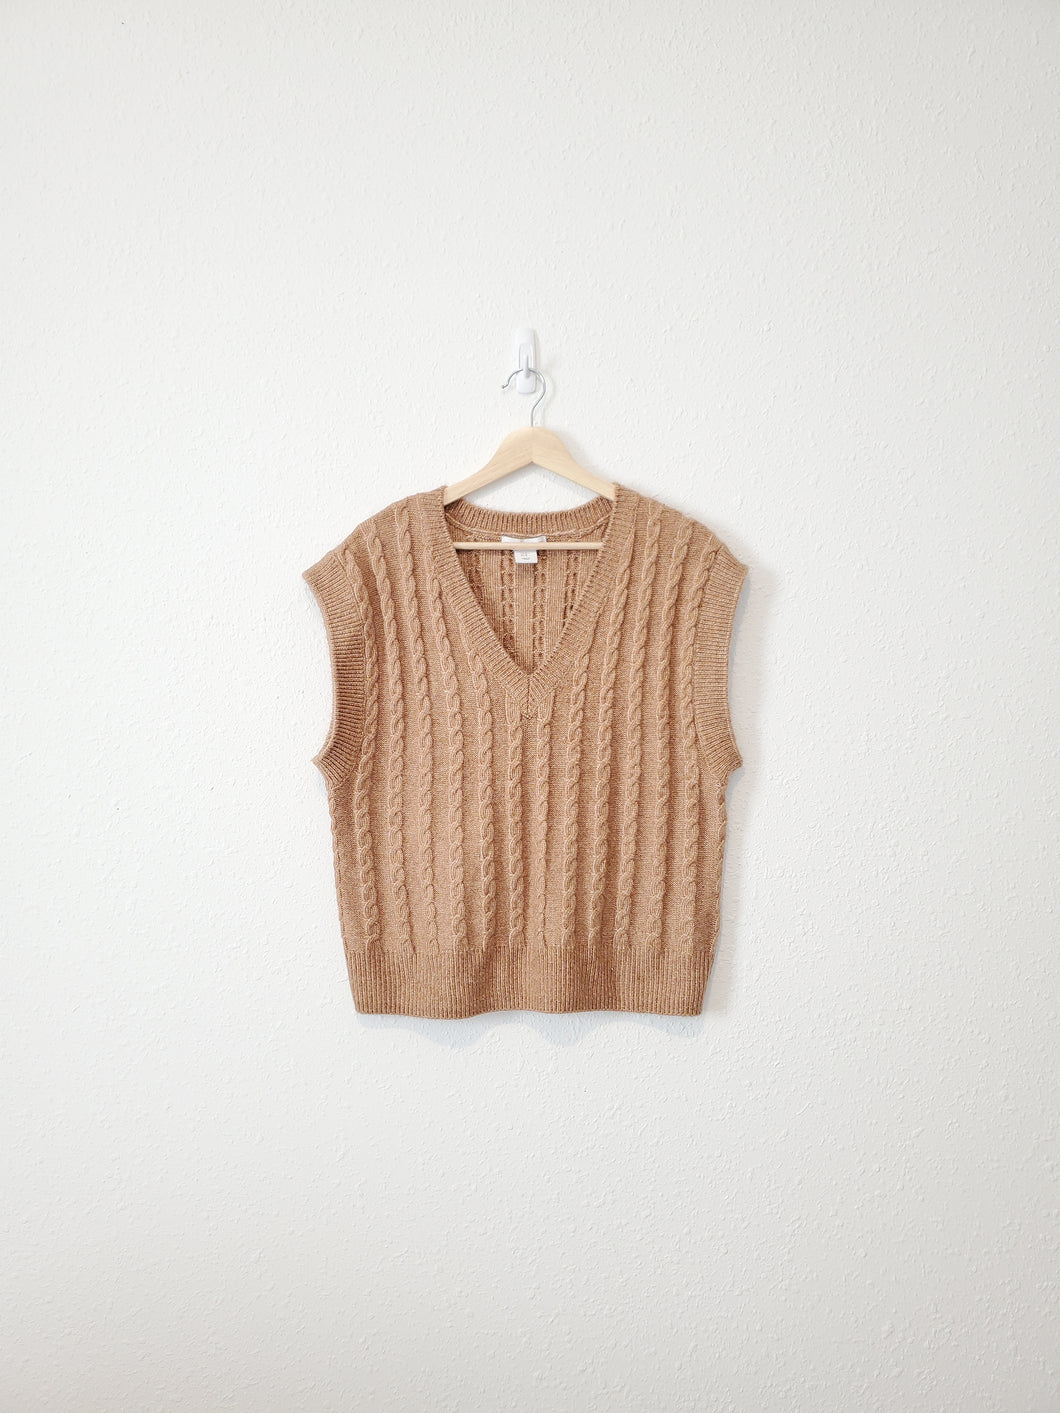 Brown Cable Knit Sweater Vest (M)